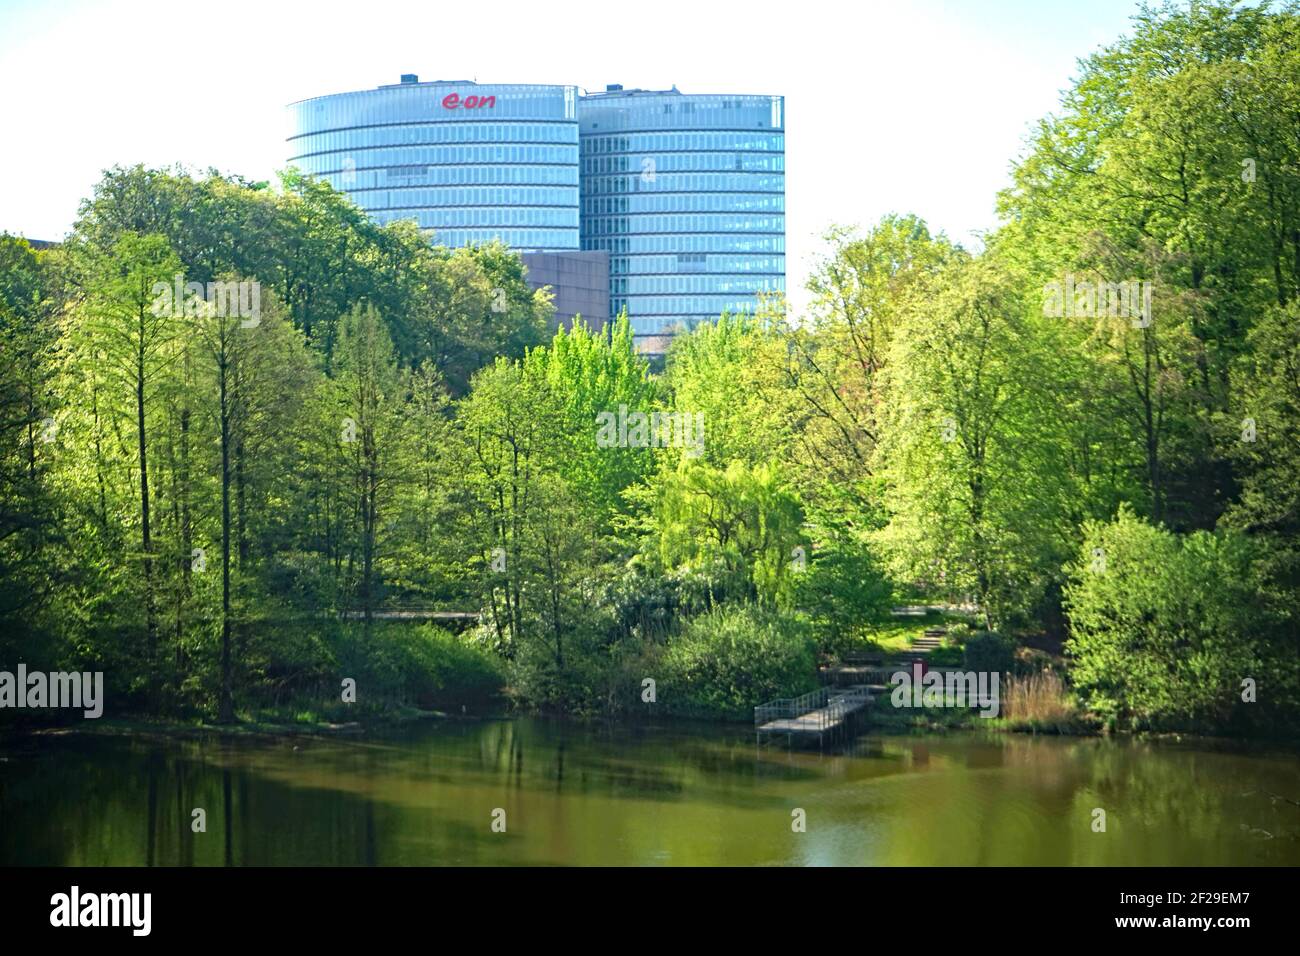 Gruga park with E-ON building in the background, Essen, NRW, Germany, Europe, April 2020 Stock Photo